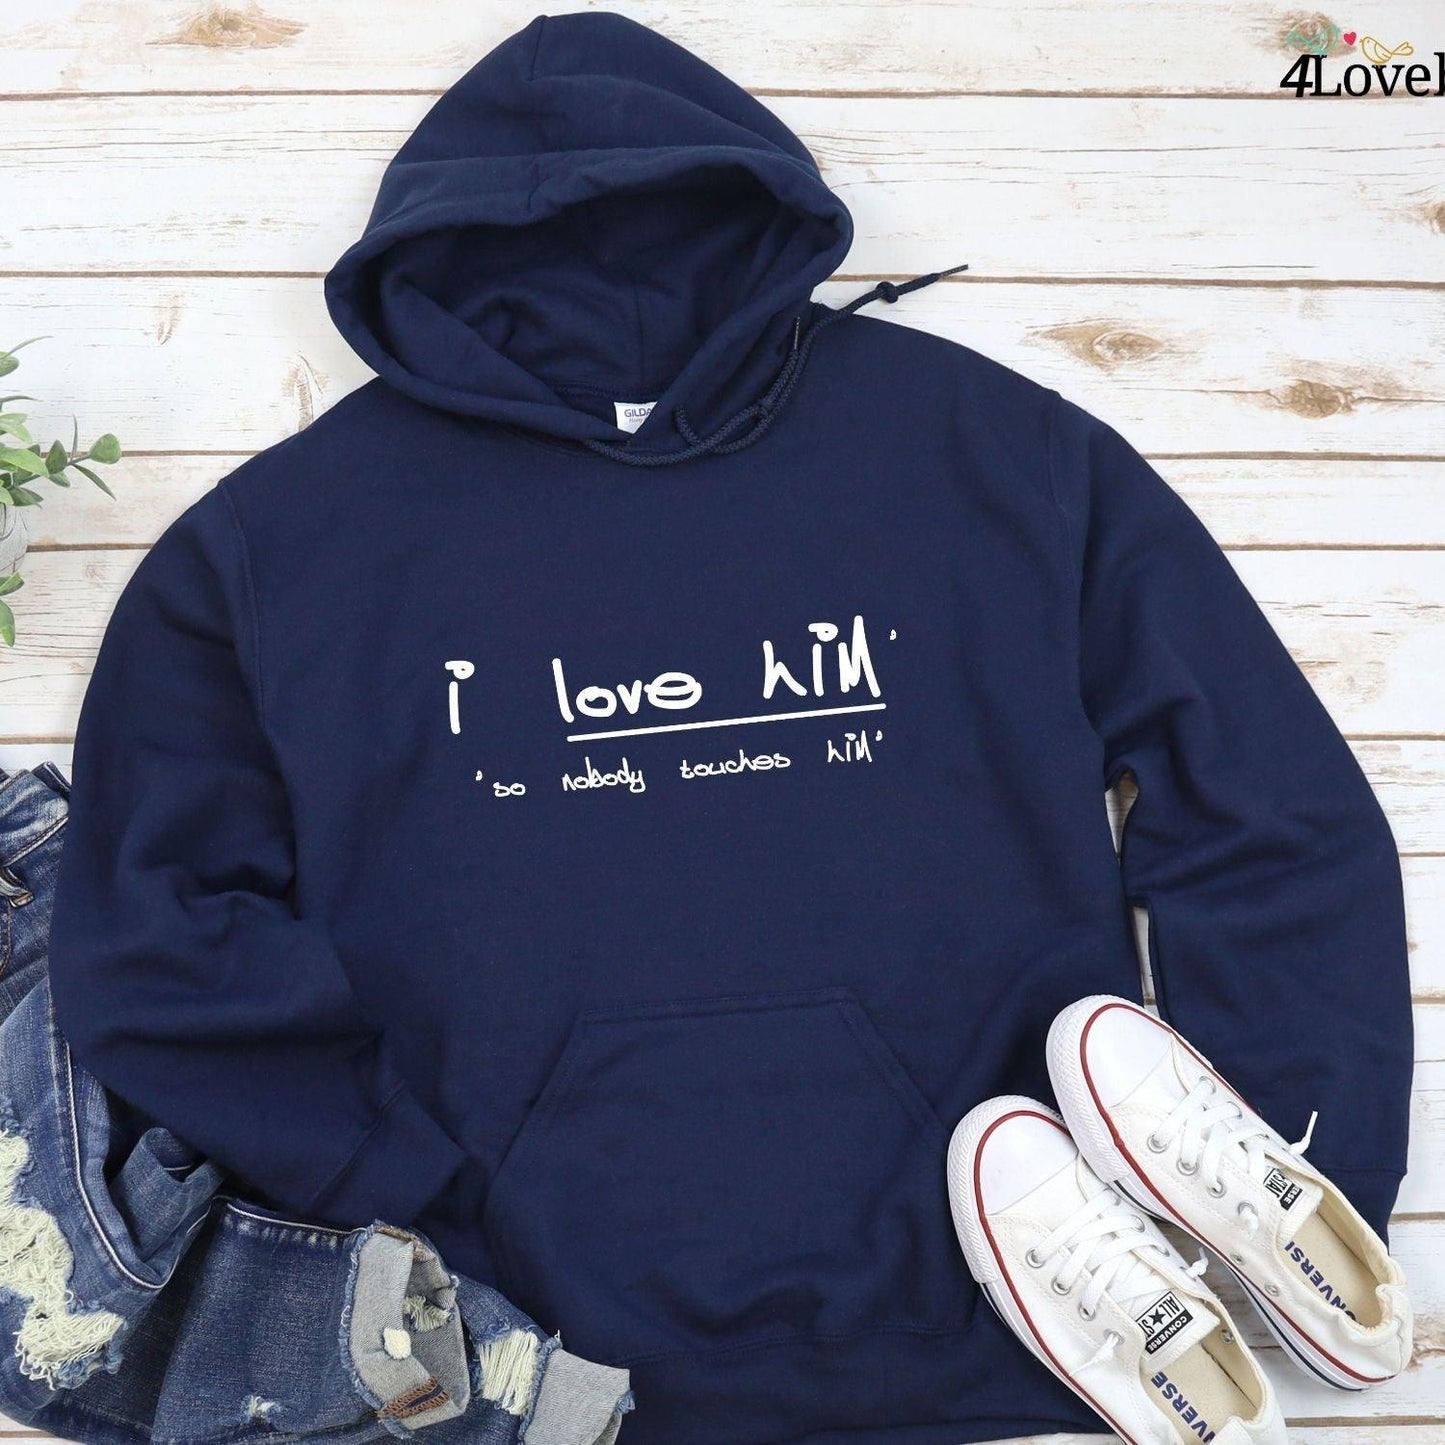 Valentine Gift for Couple: I Love Her/Him Matching Outfit Set - 4Lovebirds